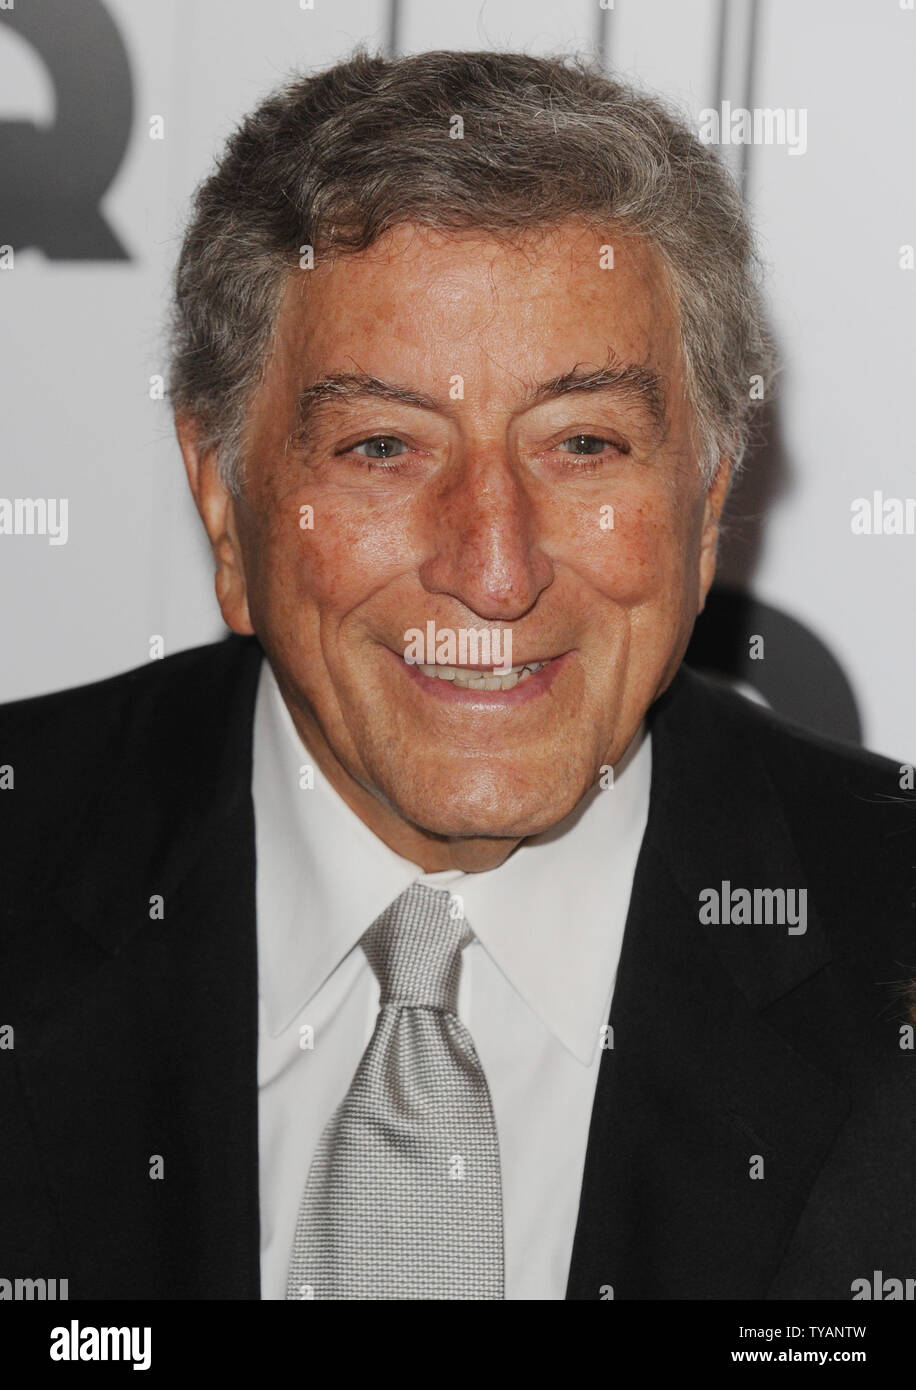 American singer Tony Bennett attends the 'GQ Man Of The Year Awards' at the Royal Opera House in London on September 2, 2008.  (UPI Photo/Rune Hellestad) Stock Photo